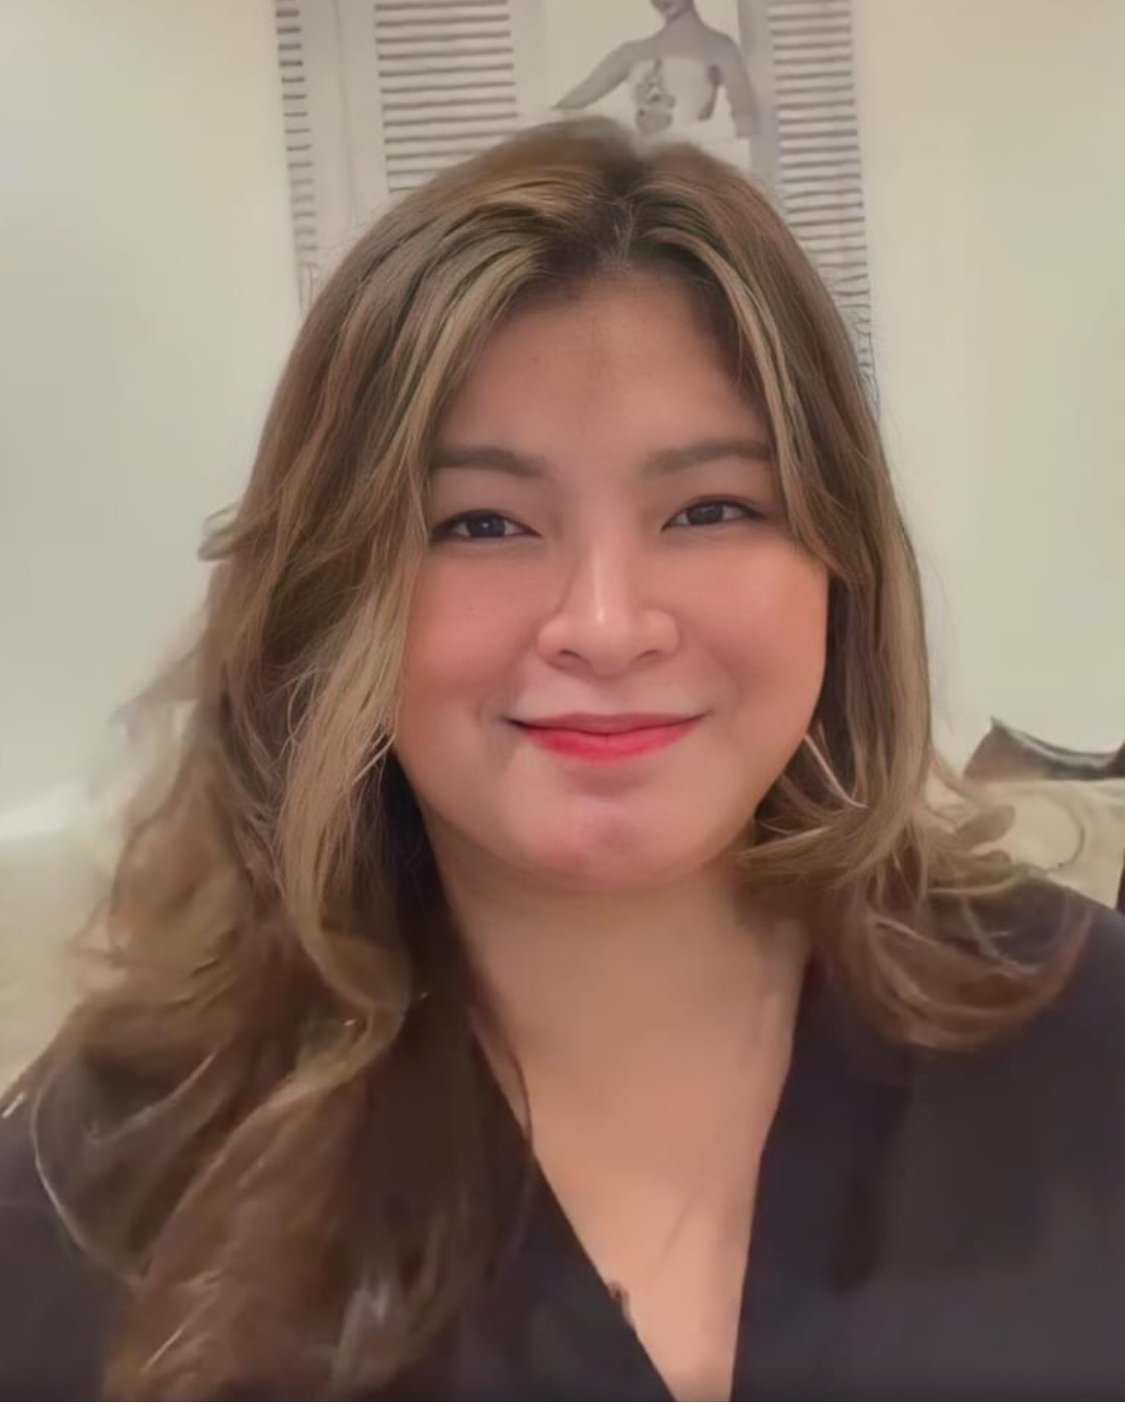 2 QC residents who joined Angel Locsin pantry COVIDpositive Journal News